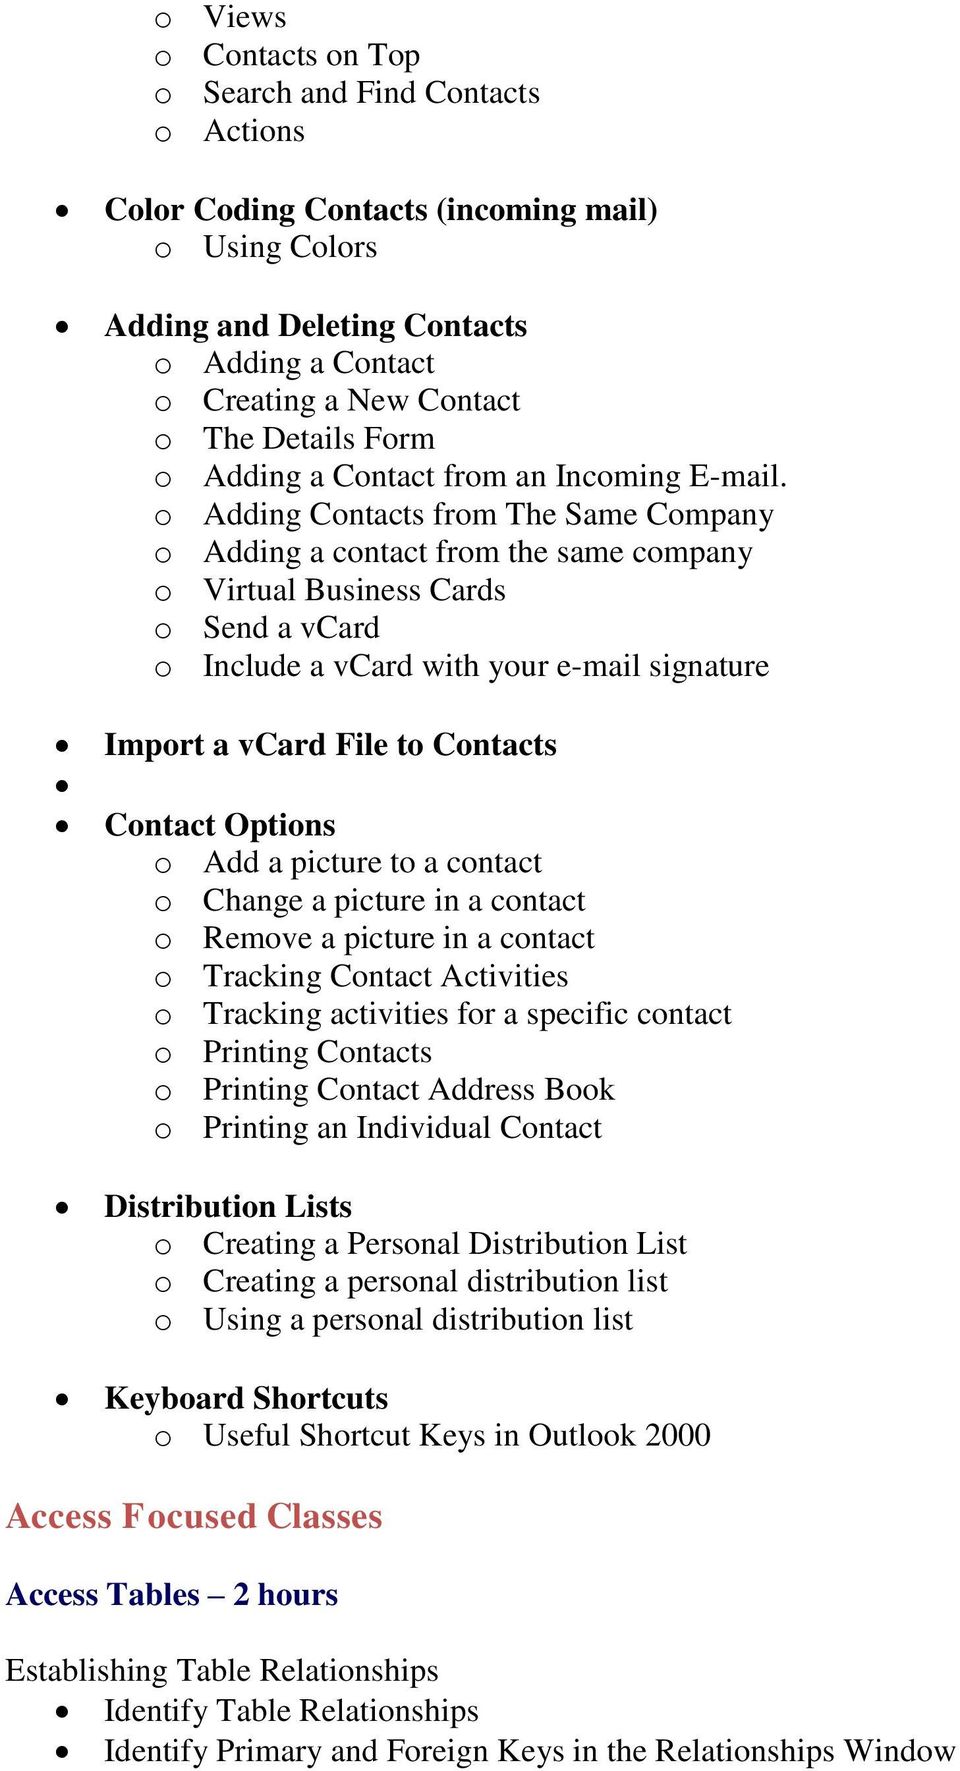 o Adding Contacts from The Same Company o Adding a contact from the same company o Virtual Business Cards o Send a vcard o Include a vcard with your e-mail signature Import a vcard File to Contacts